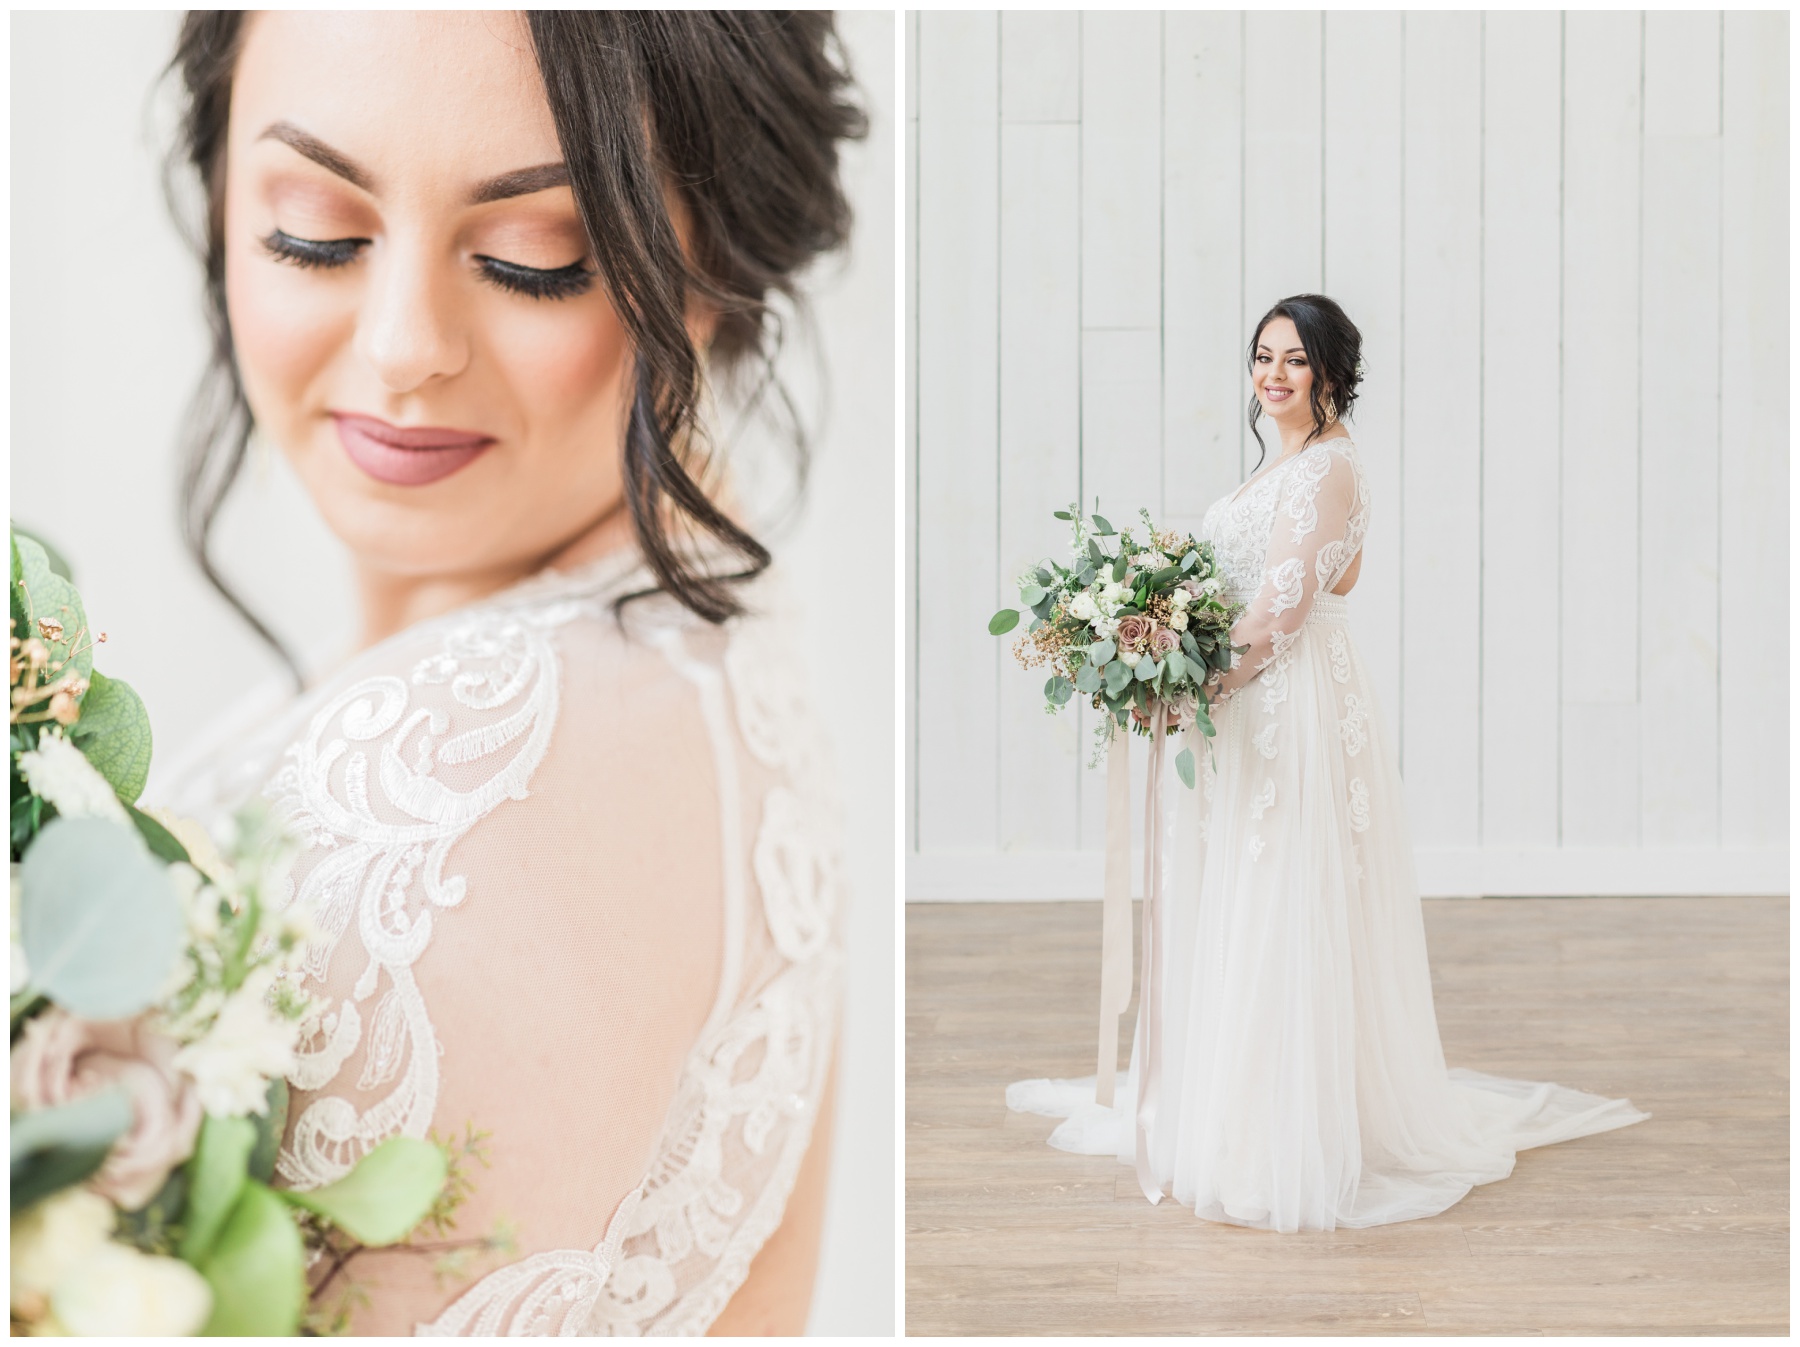 Bridal portraits at The Springs in Wallisville